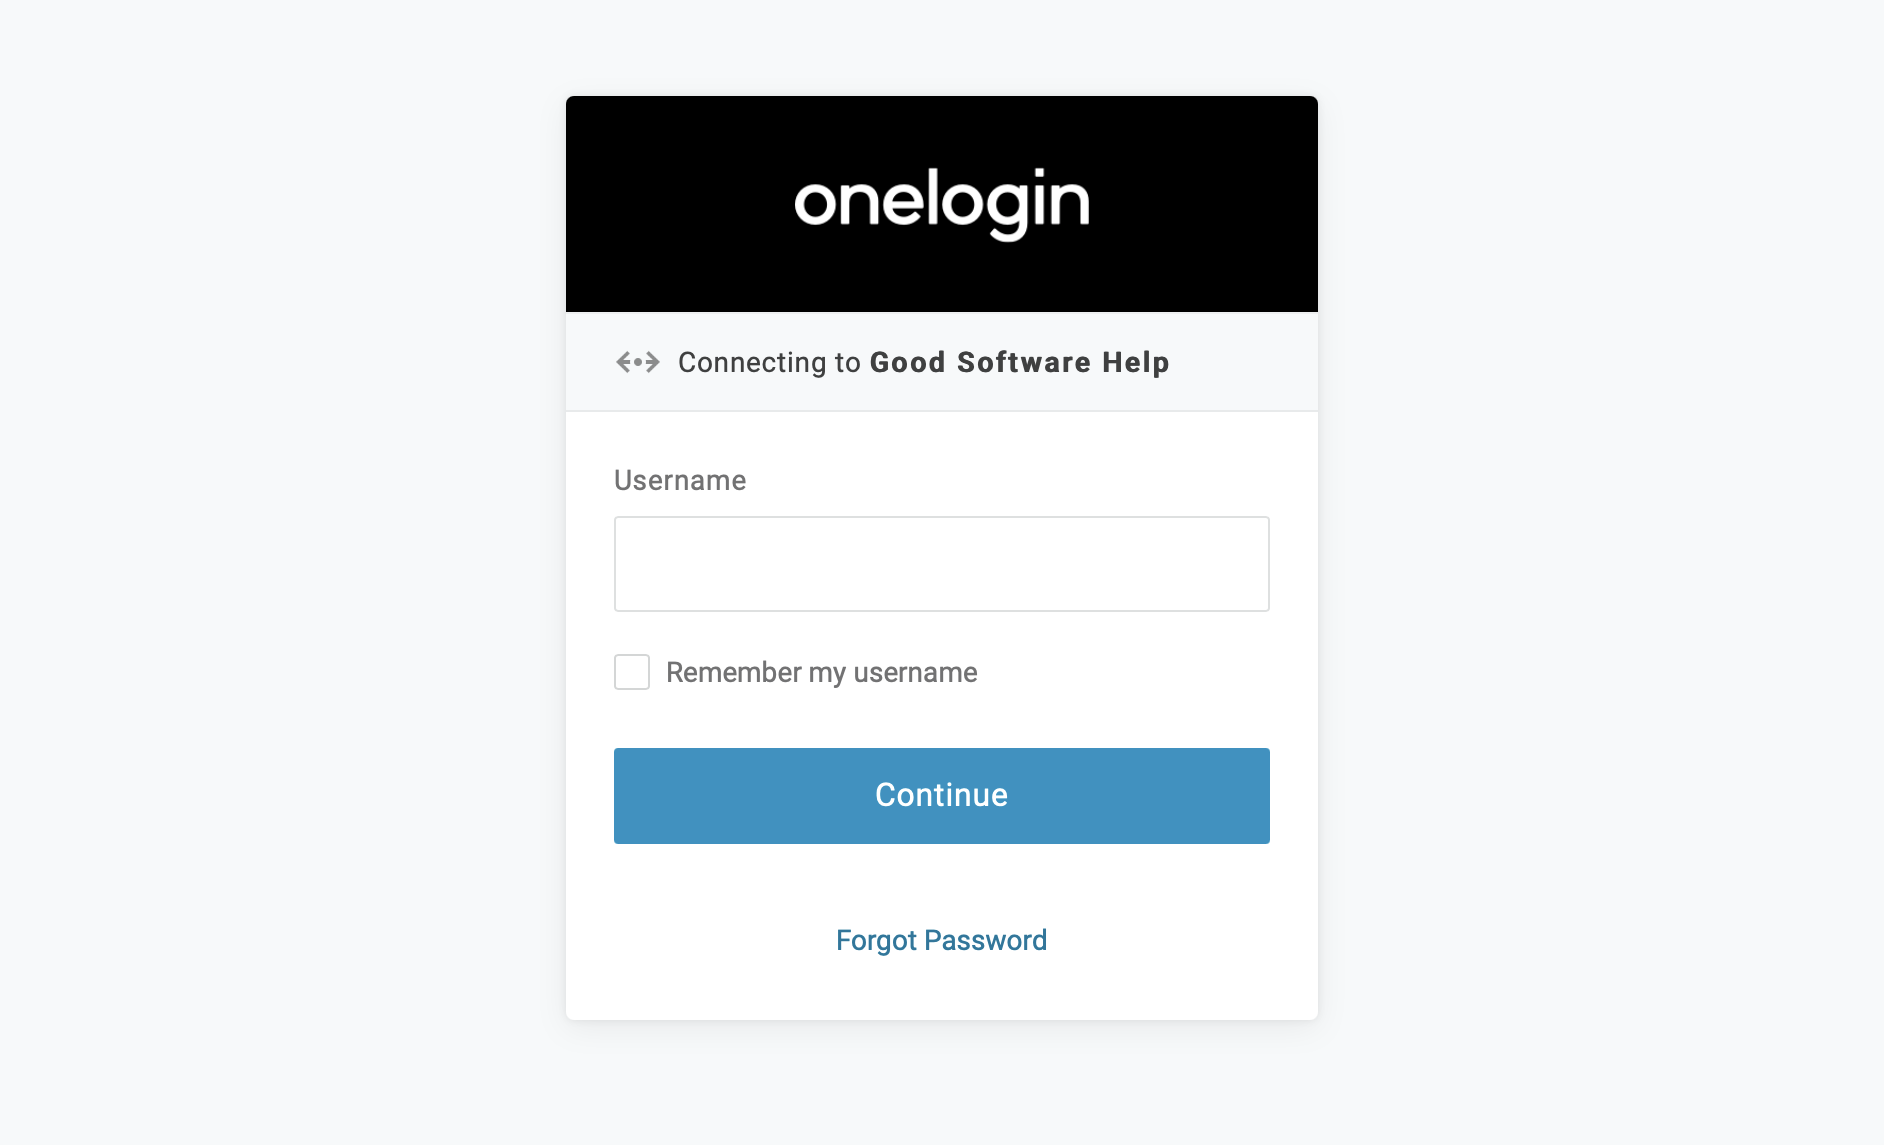 An example login page from onelogin